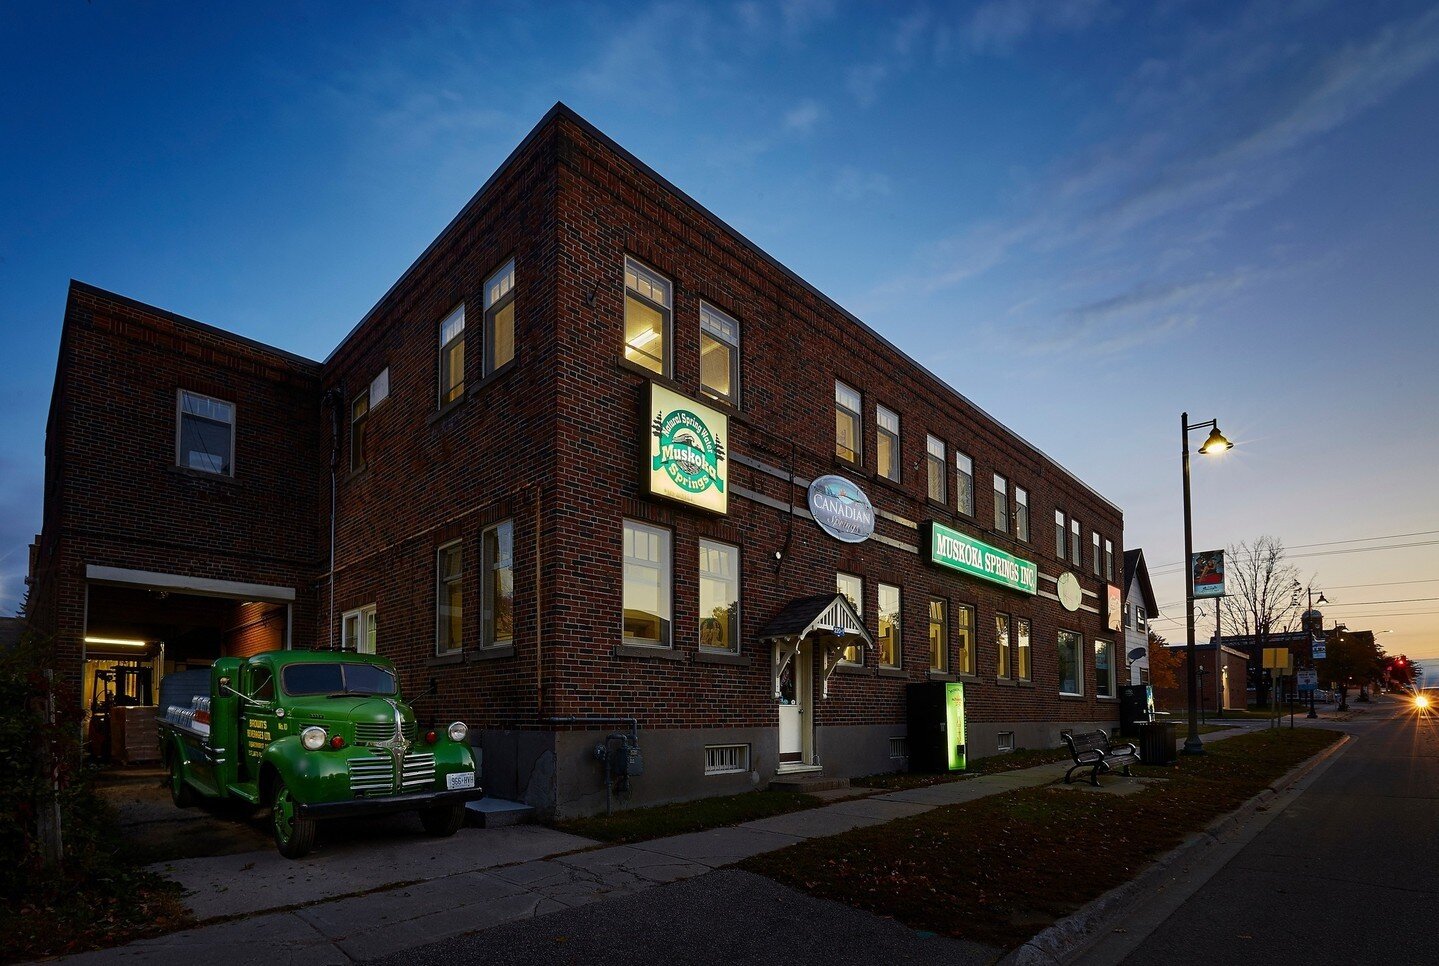 We love this photo of our headquarters located in downtown Gravenhurst, Muskoka!